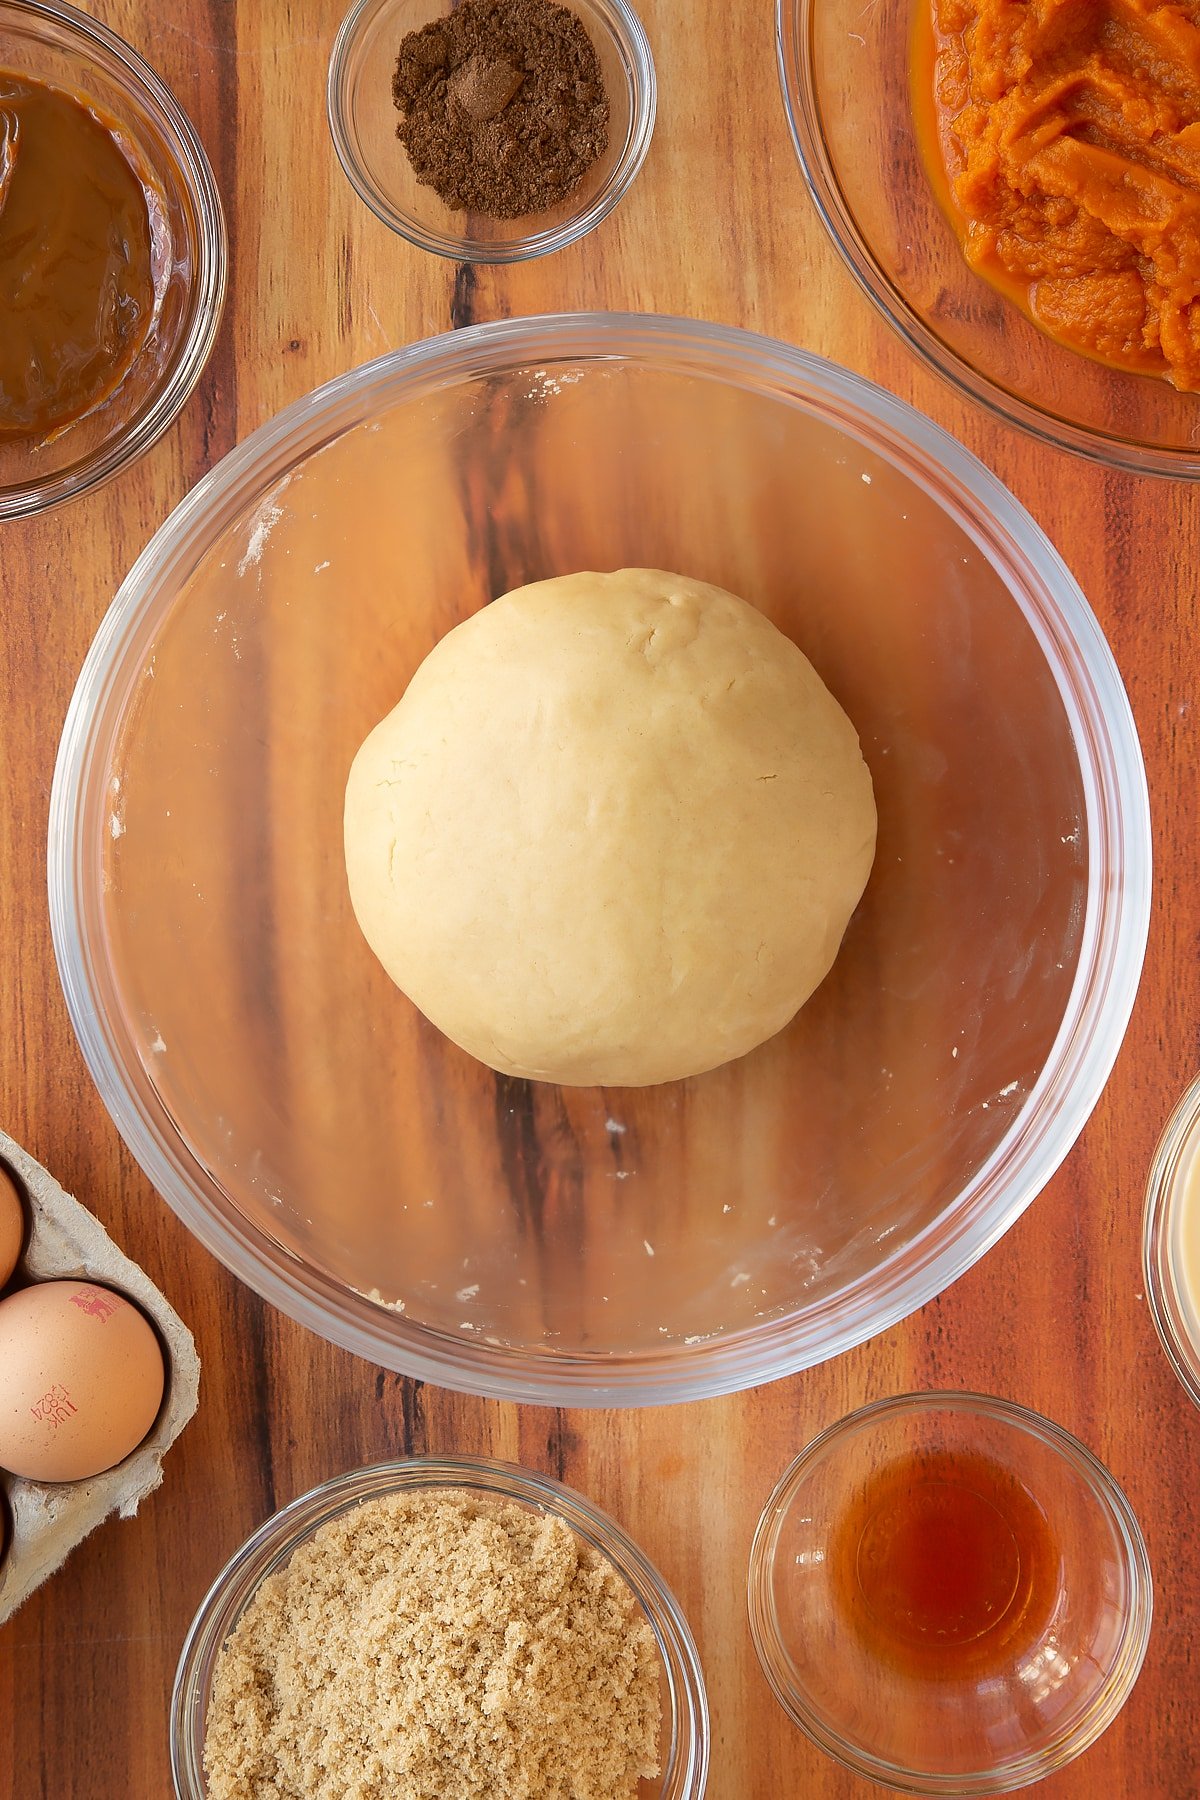 The caramel pumpkin pie pastry having been mixed and kneaded into a ball.